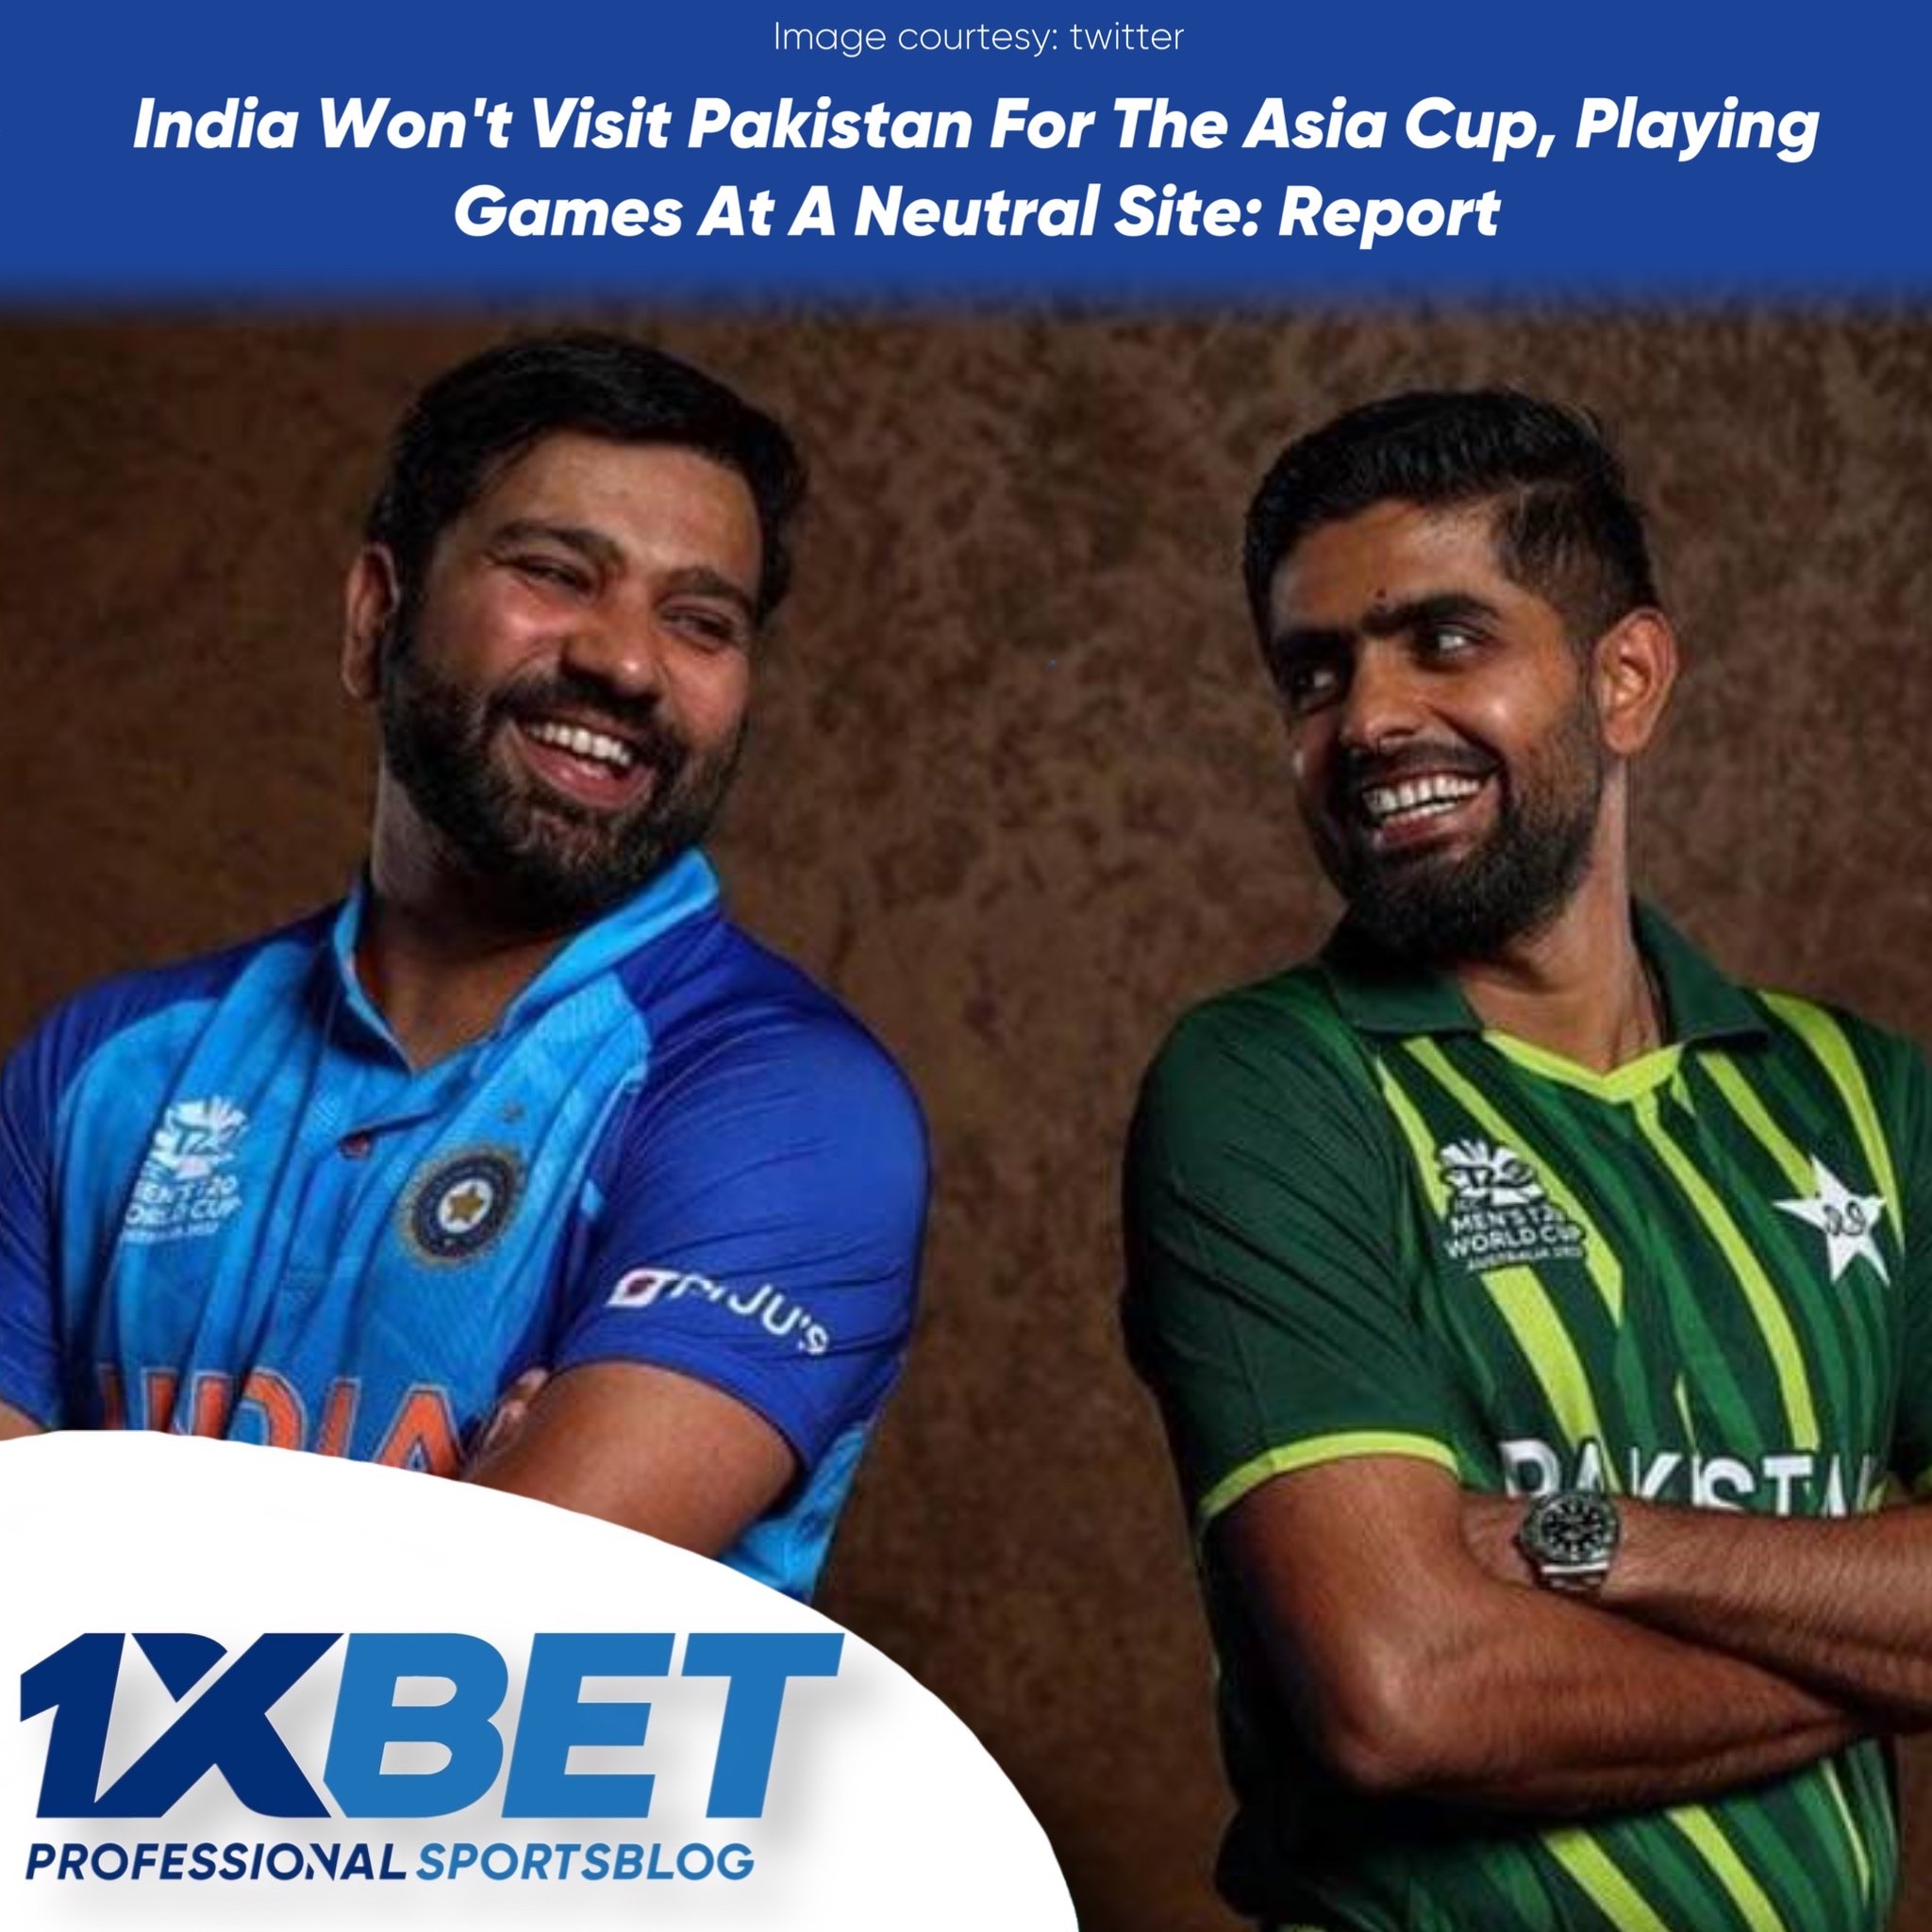 India Won't Visit Pakistan For The Asia Cup, Playing Games At A Neutral Site: Report